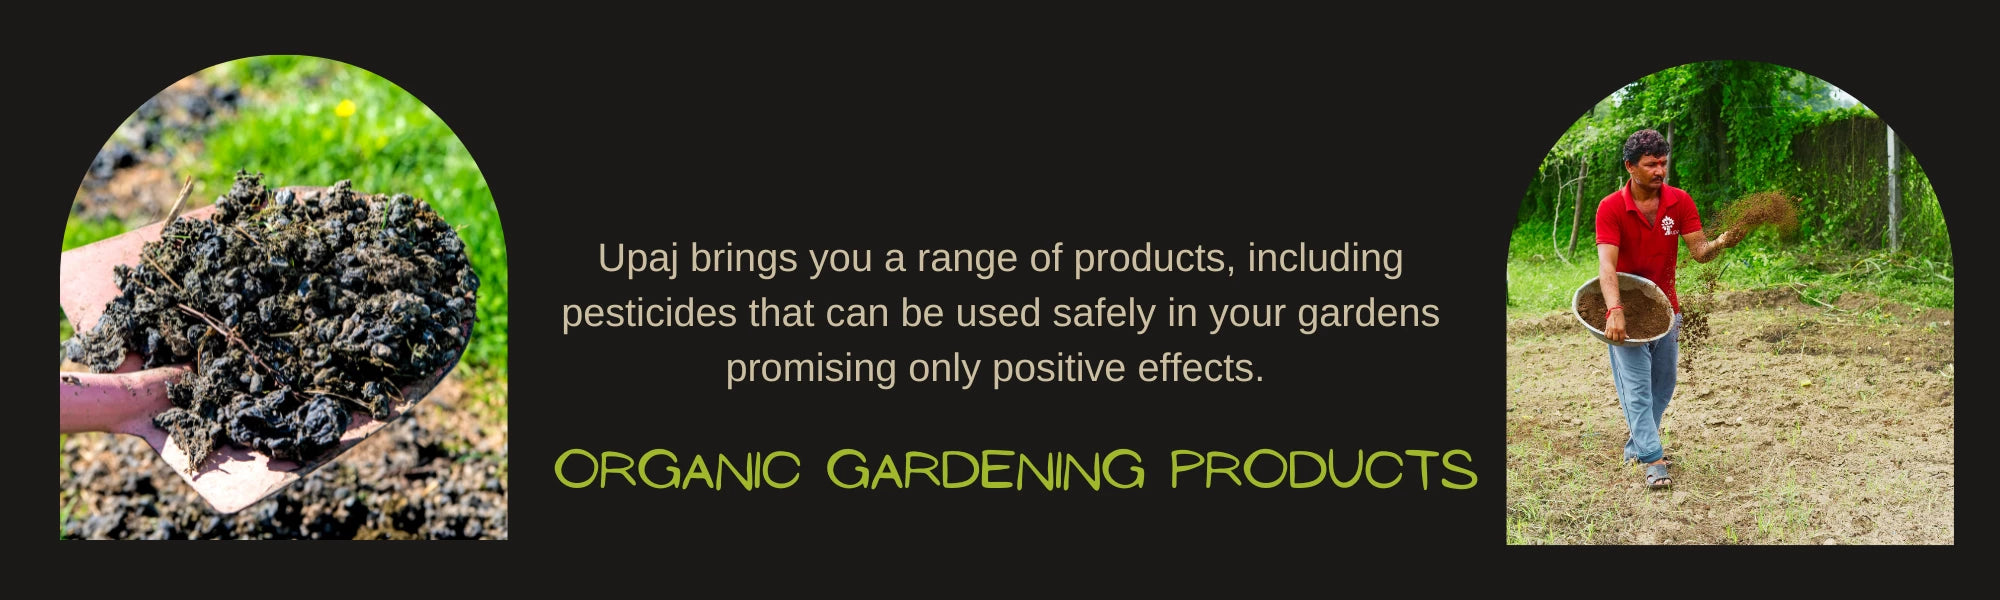 ORGANIC GARDEN PRODUCTS